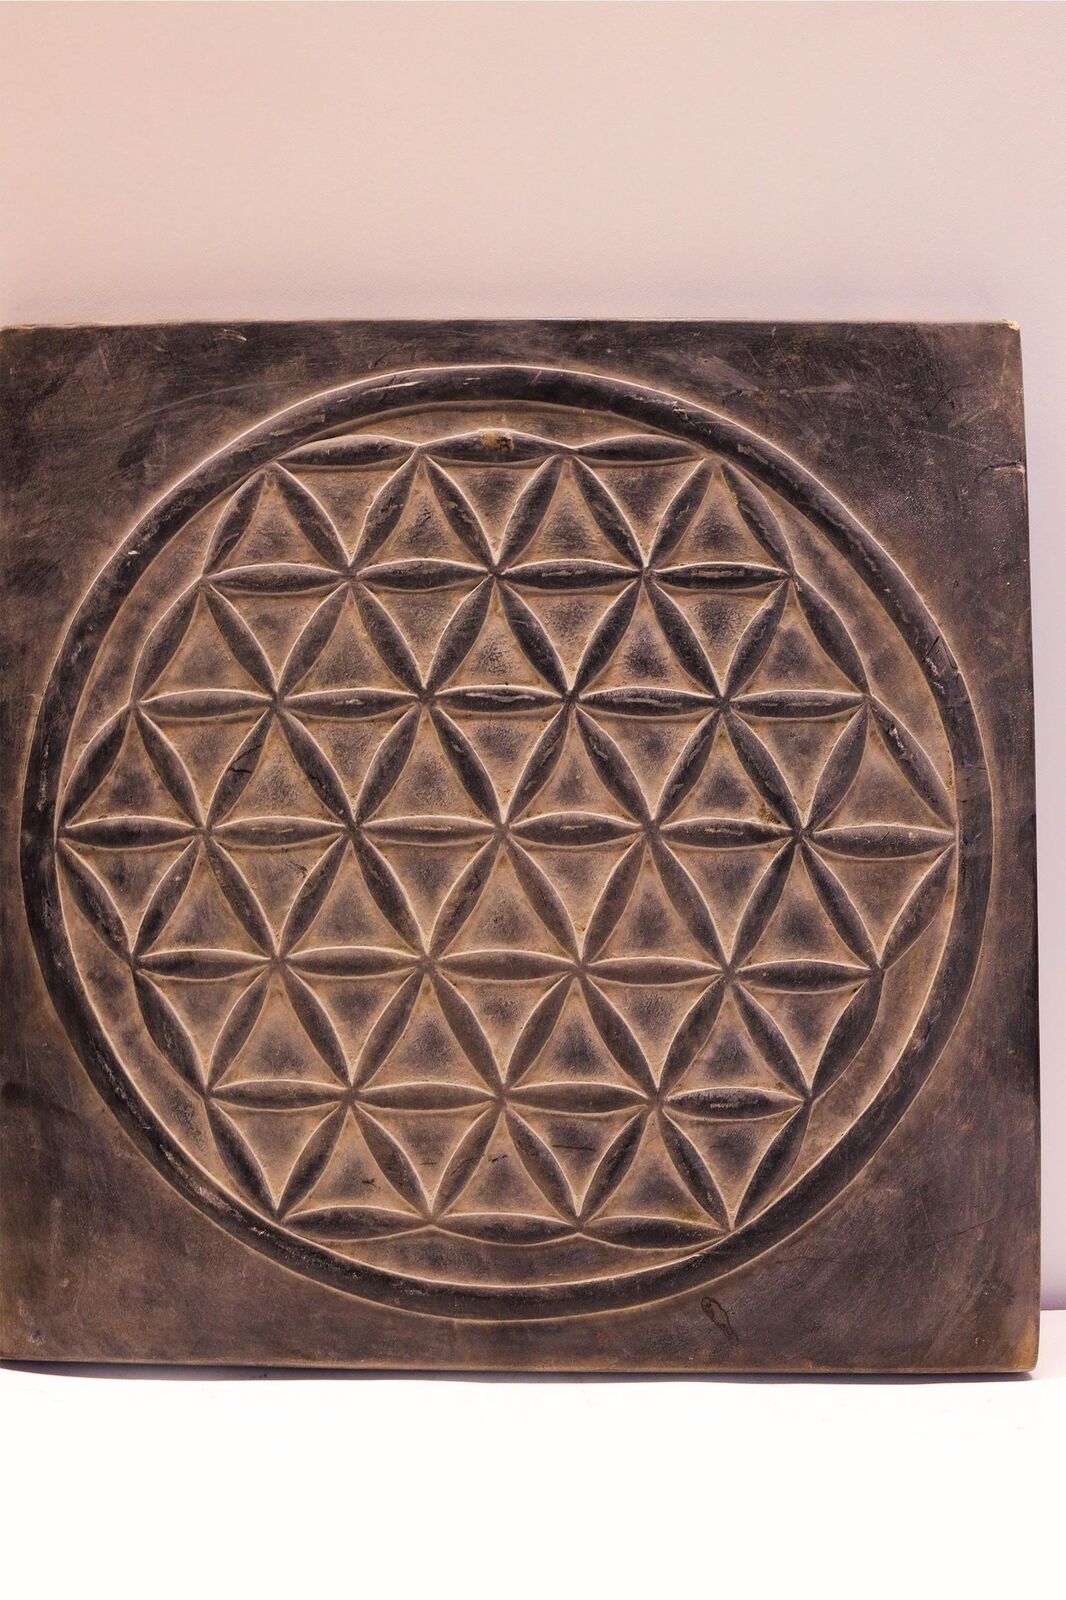 Fantastic Wall relief of the Flower of life, symbol of sacred geometry-flower